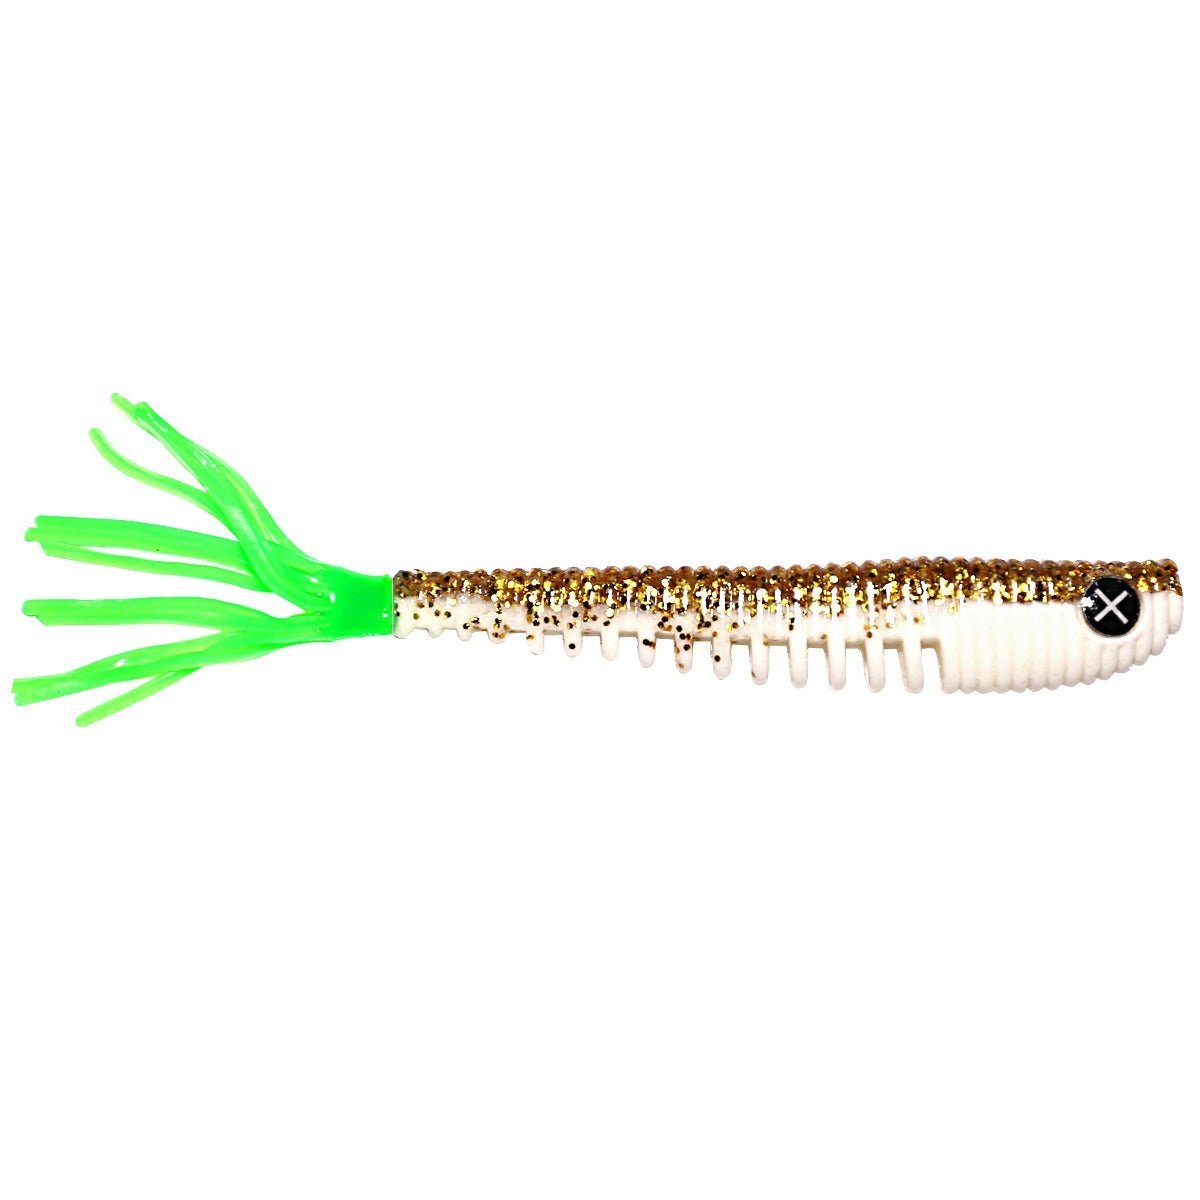 Rush Gold Lui Kunstköder by Lures Big Hairy Monkey Lures Monkey 14cm L